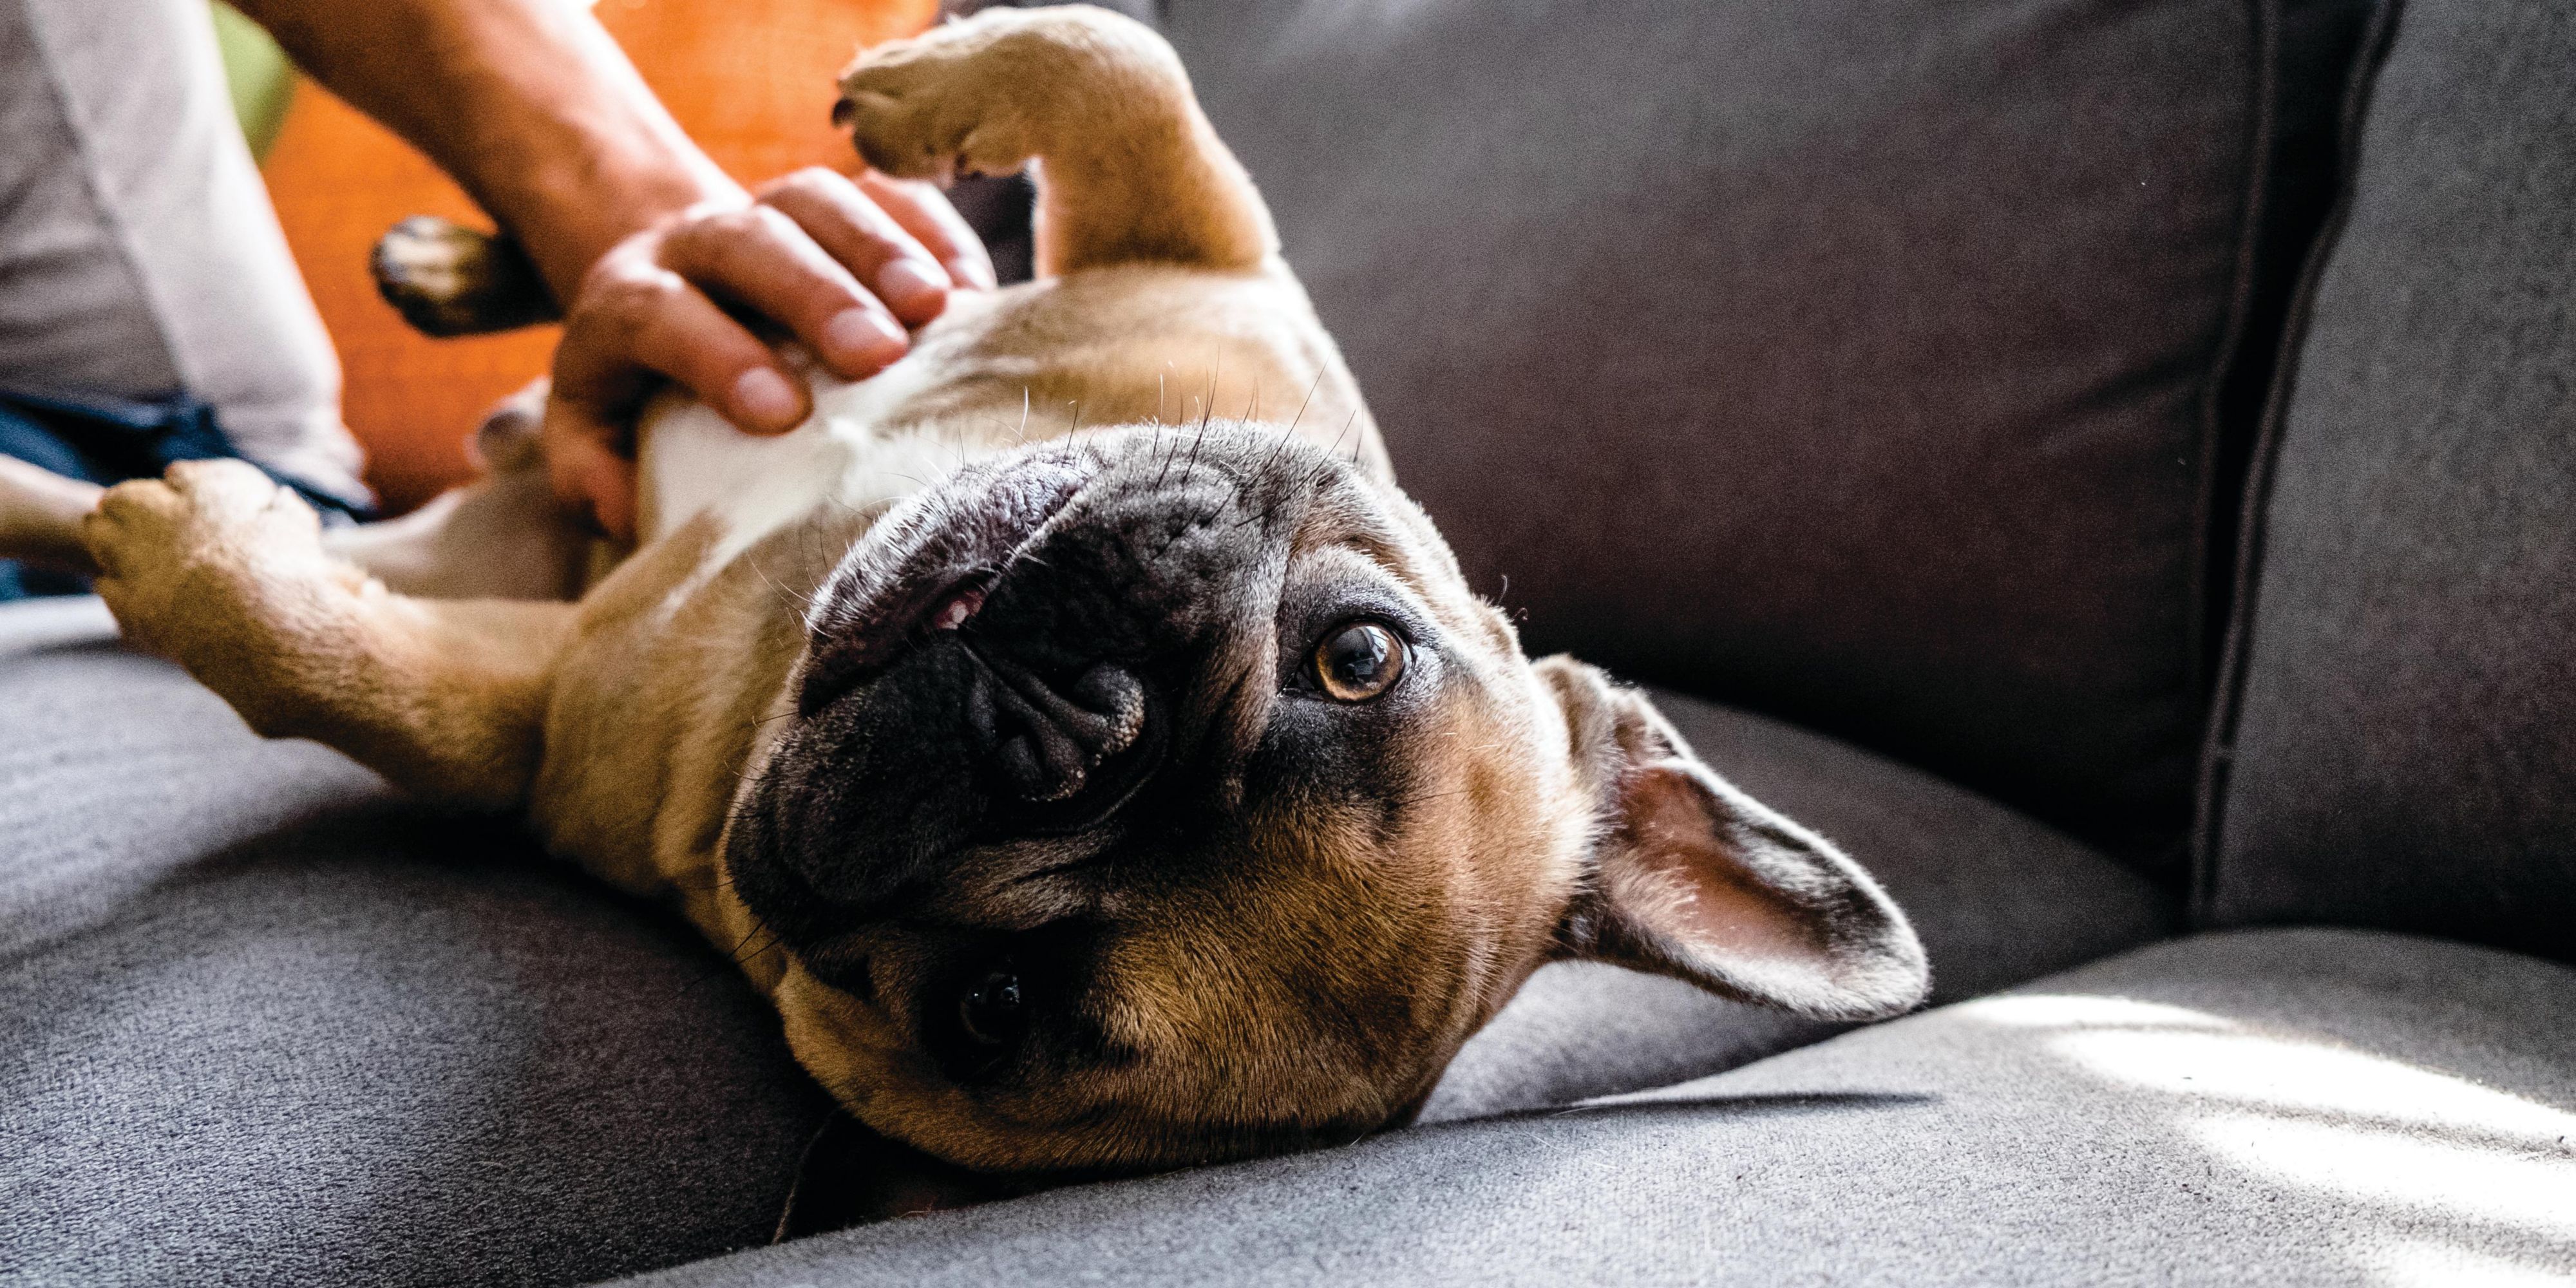 Don't leave your pet behind, we are pet friendly!  A pet fee of $15 plus tax per stay will apply for stays less than 3 days. Reach out to our Guest Services team for more details.  

